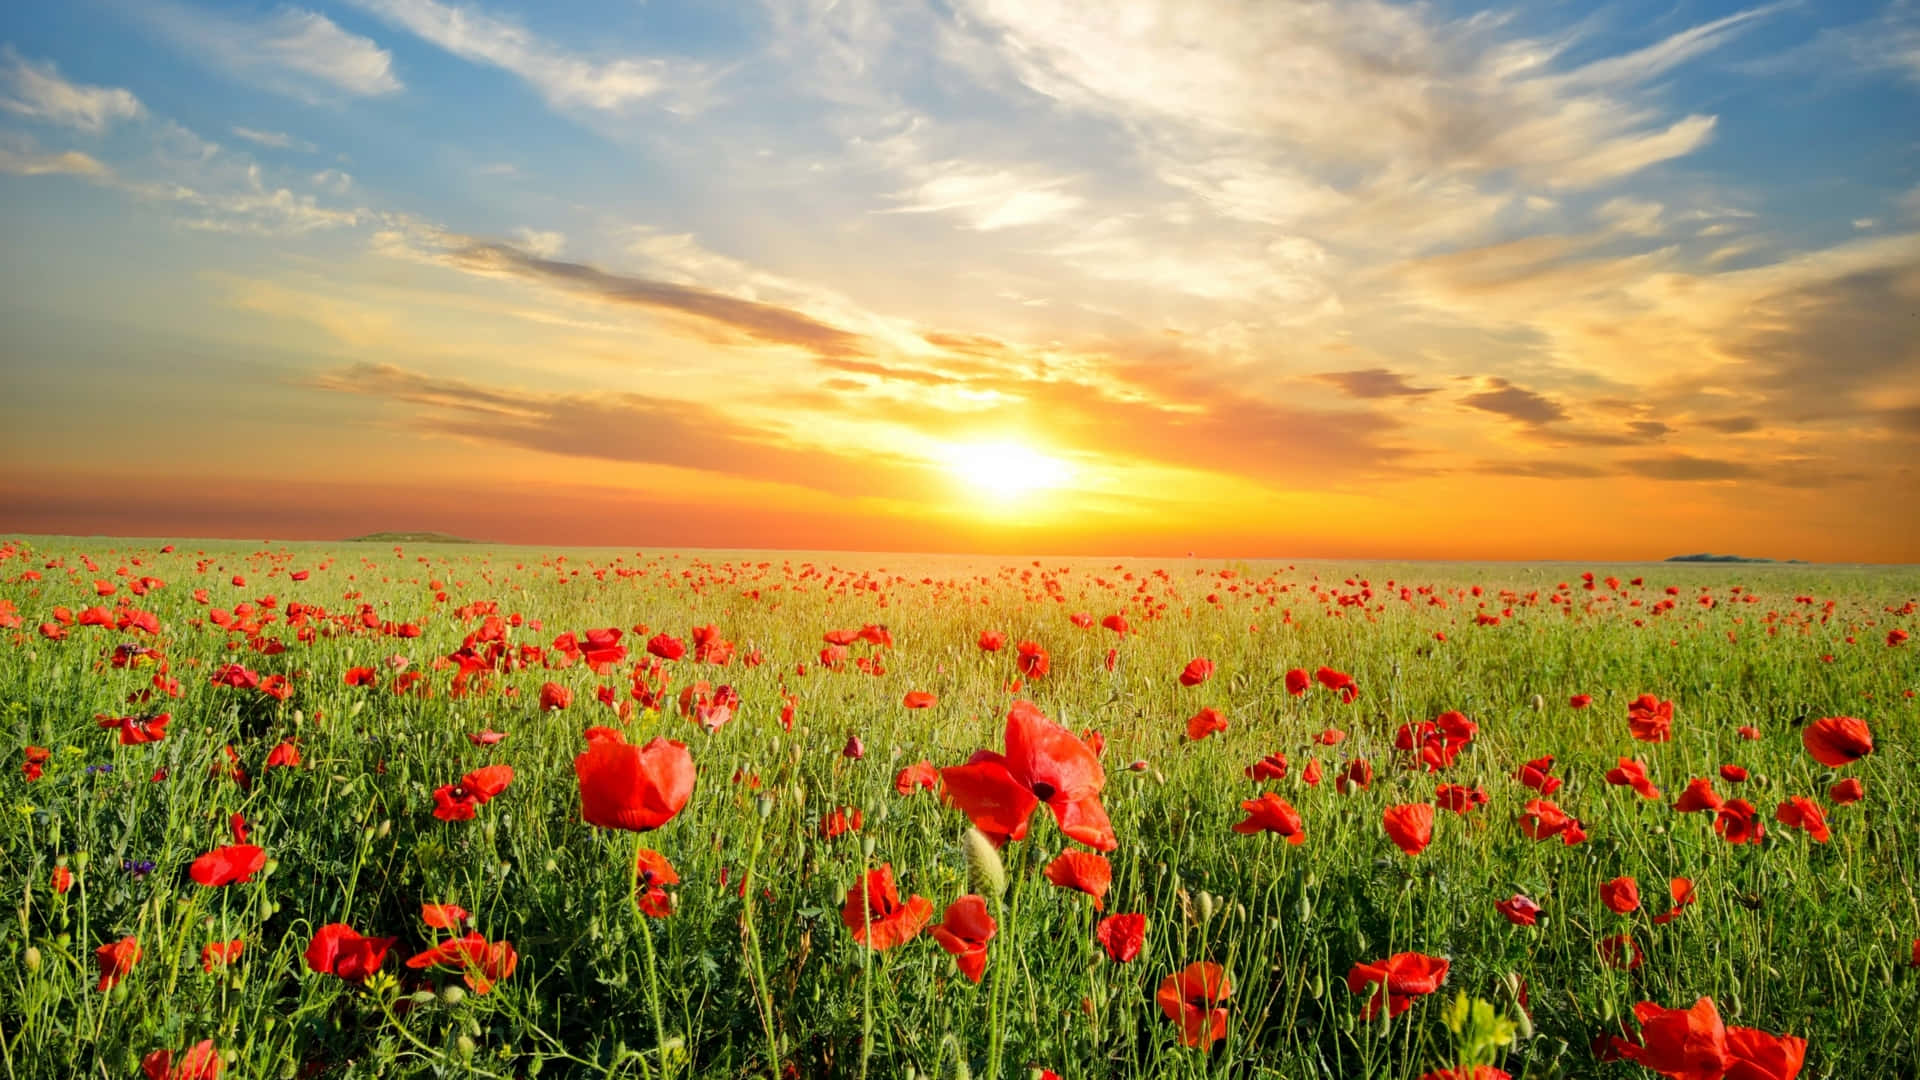 Red Poppies In The Field At Sunset Wallpaper